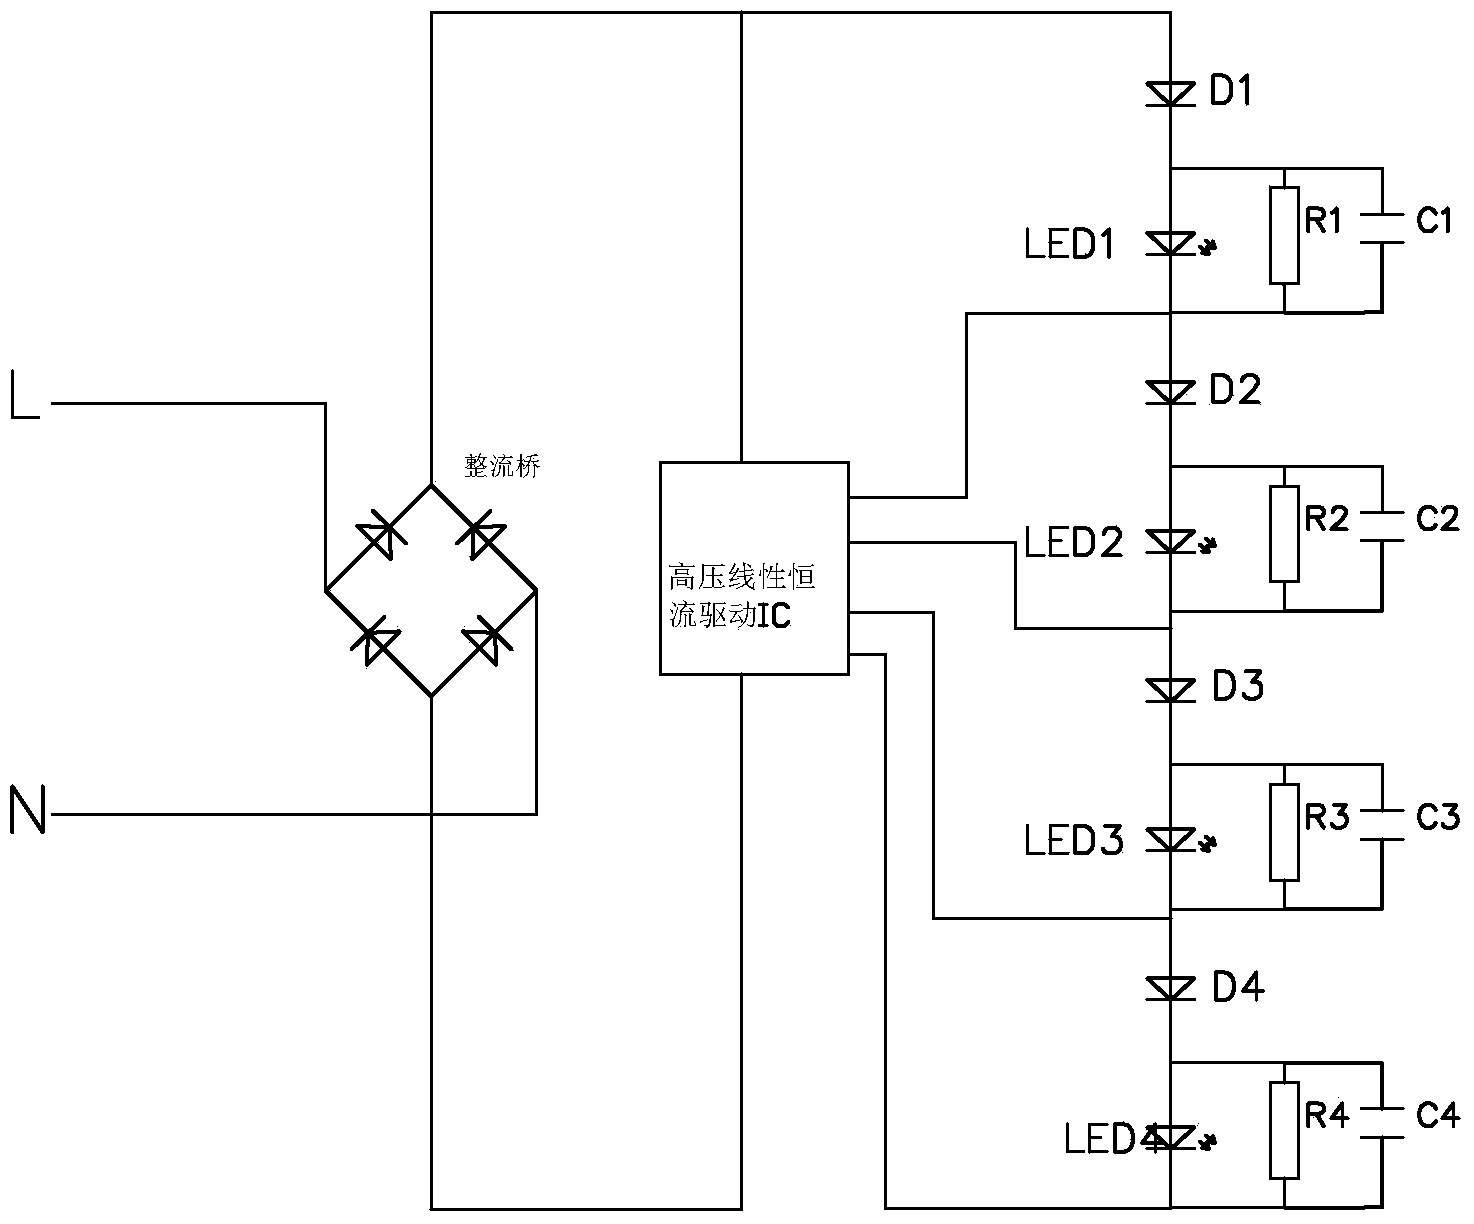 Circuit capable of solving problem of high-voltage linear driving strobing